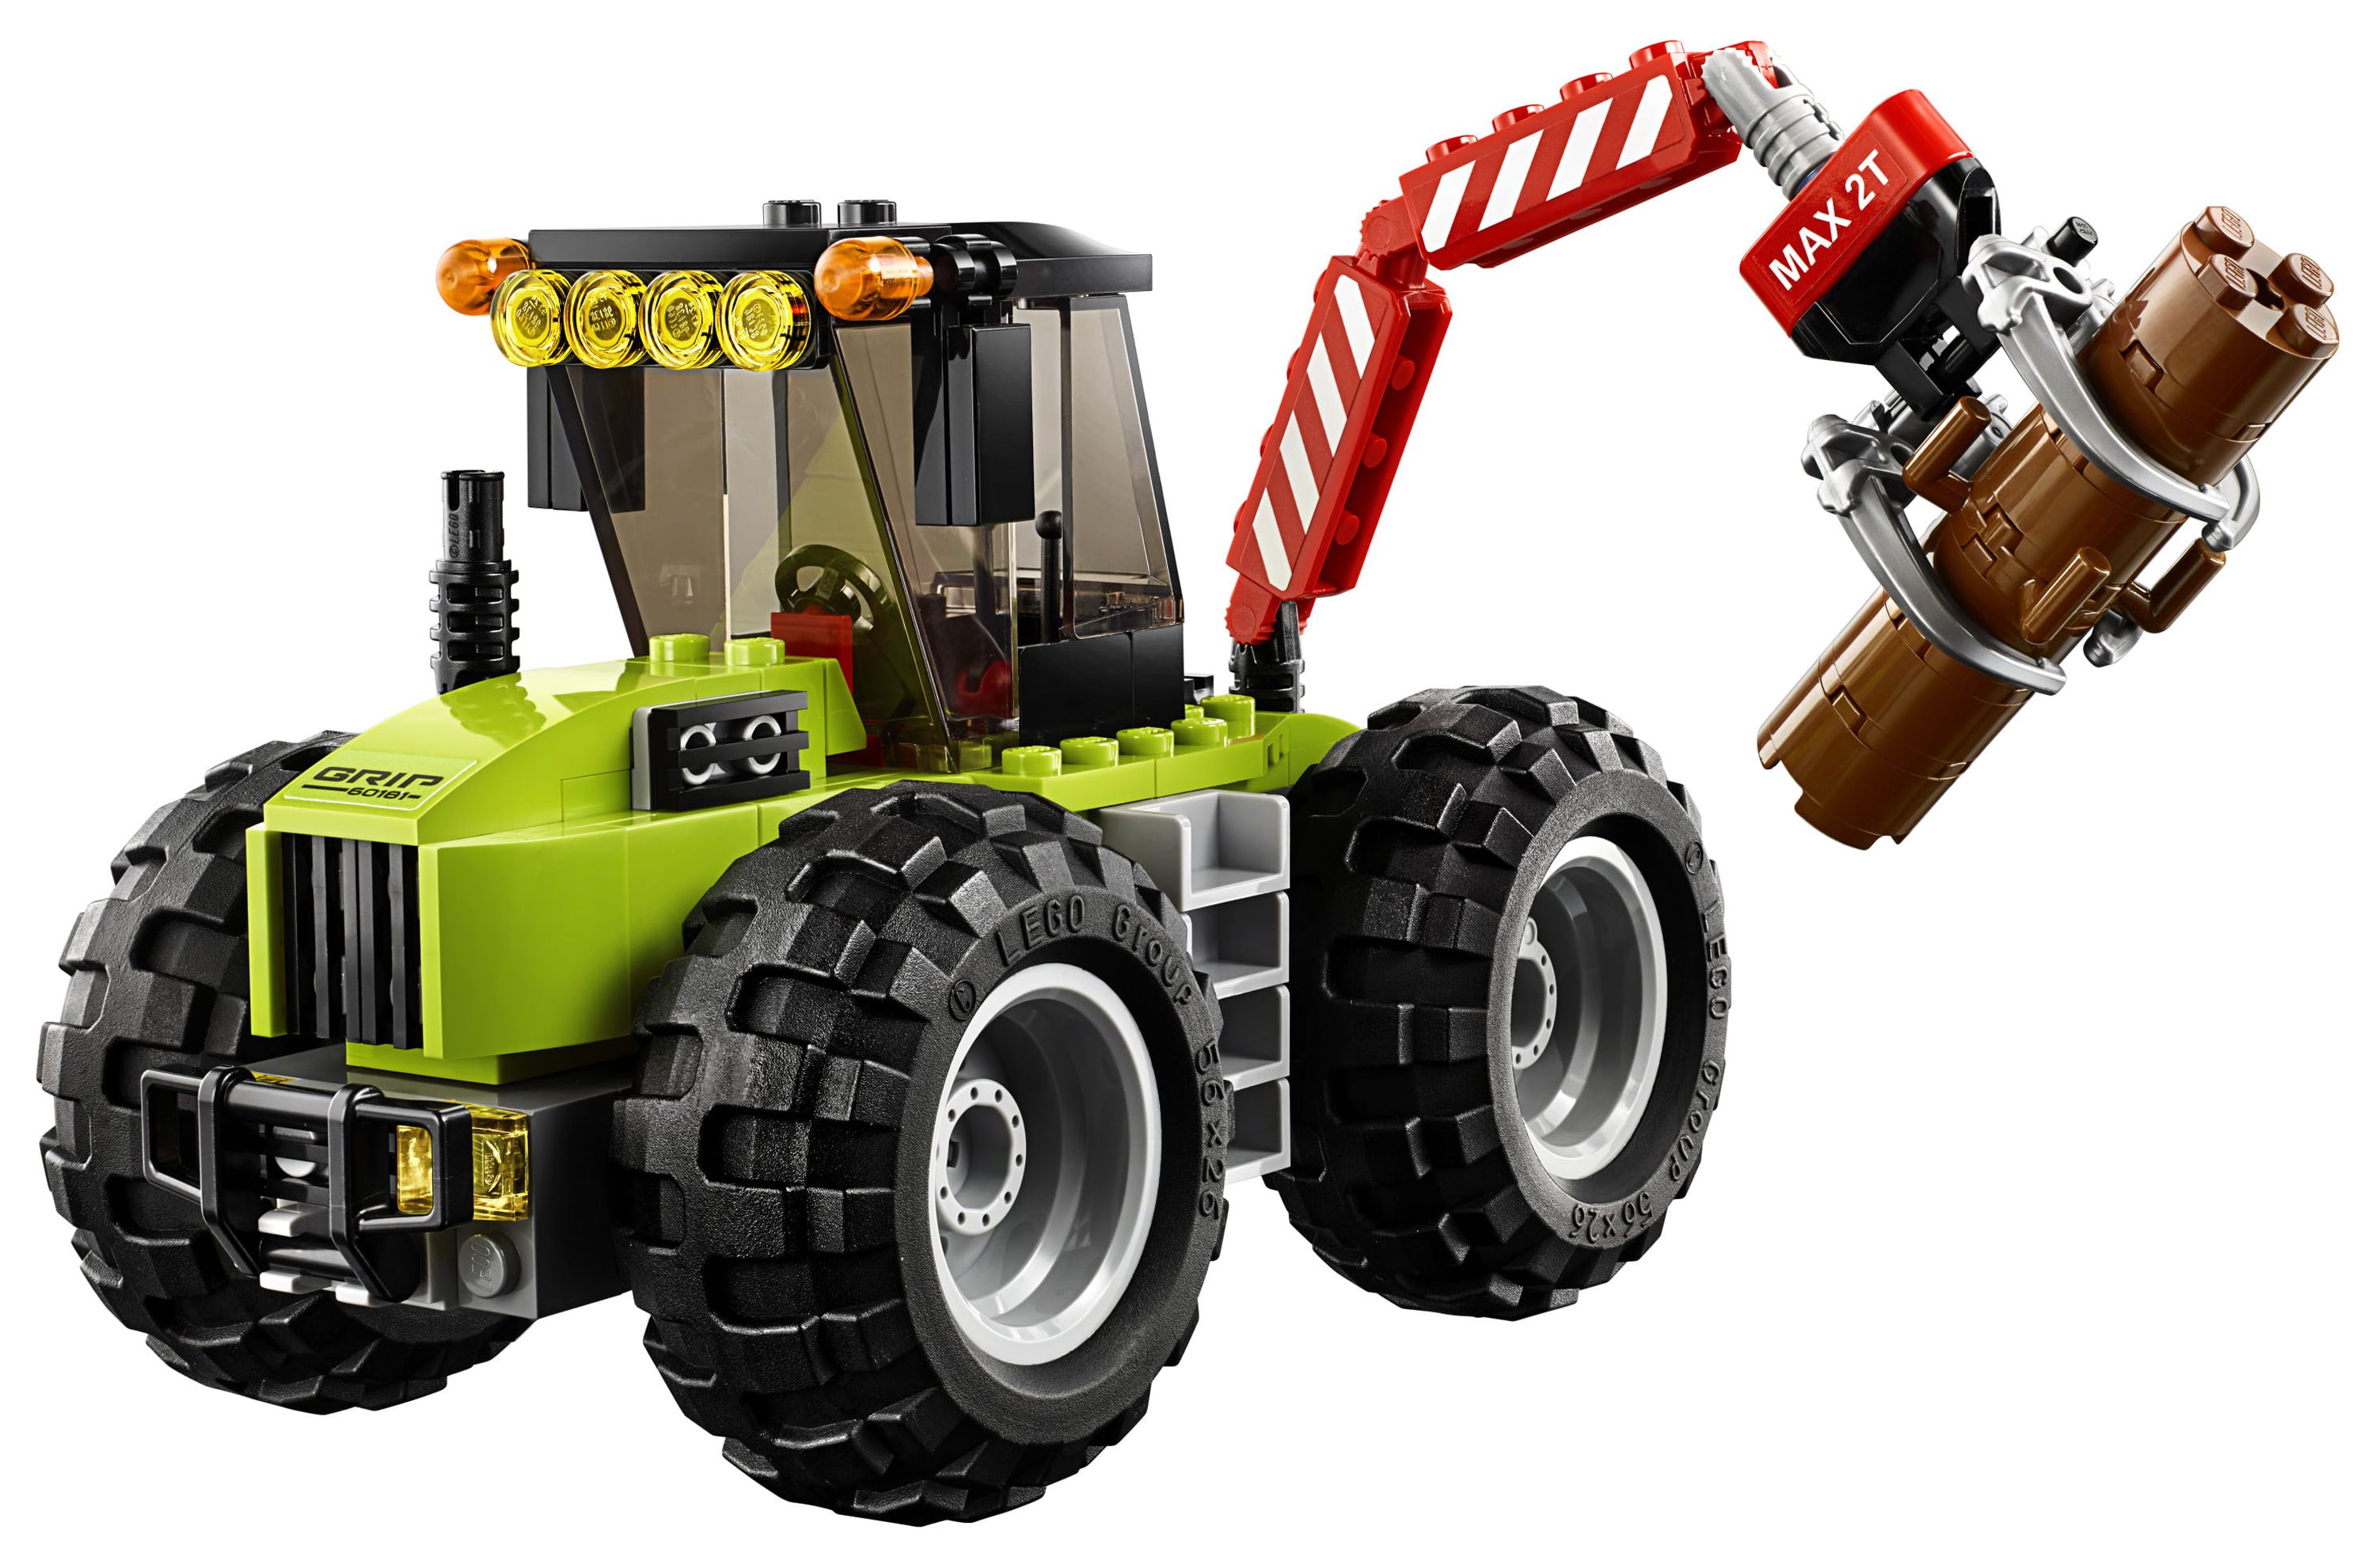 LEGO City Great Vehicles Forest Tractor 60181 - image 3 of 5